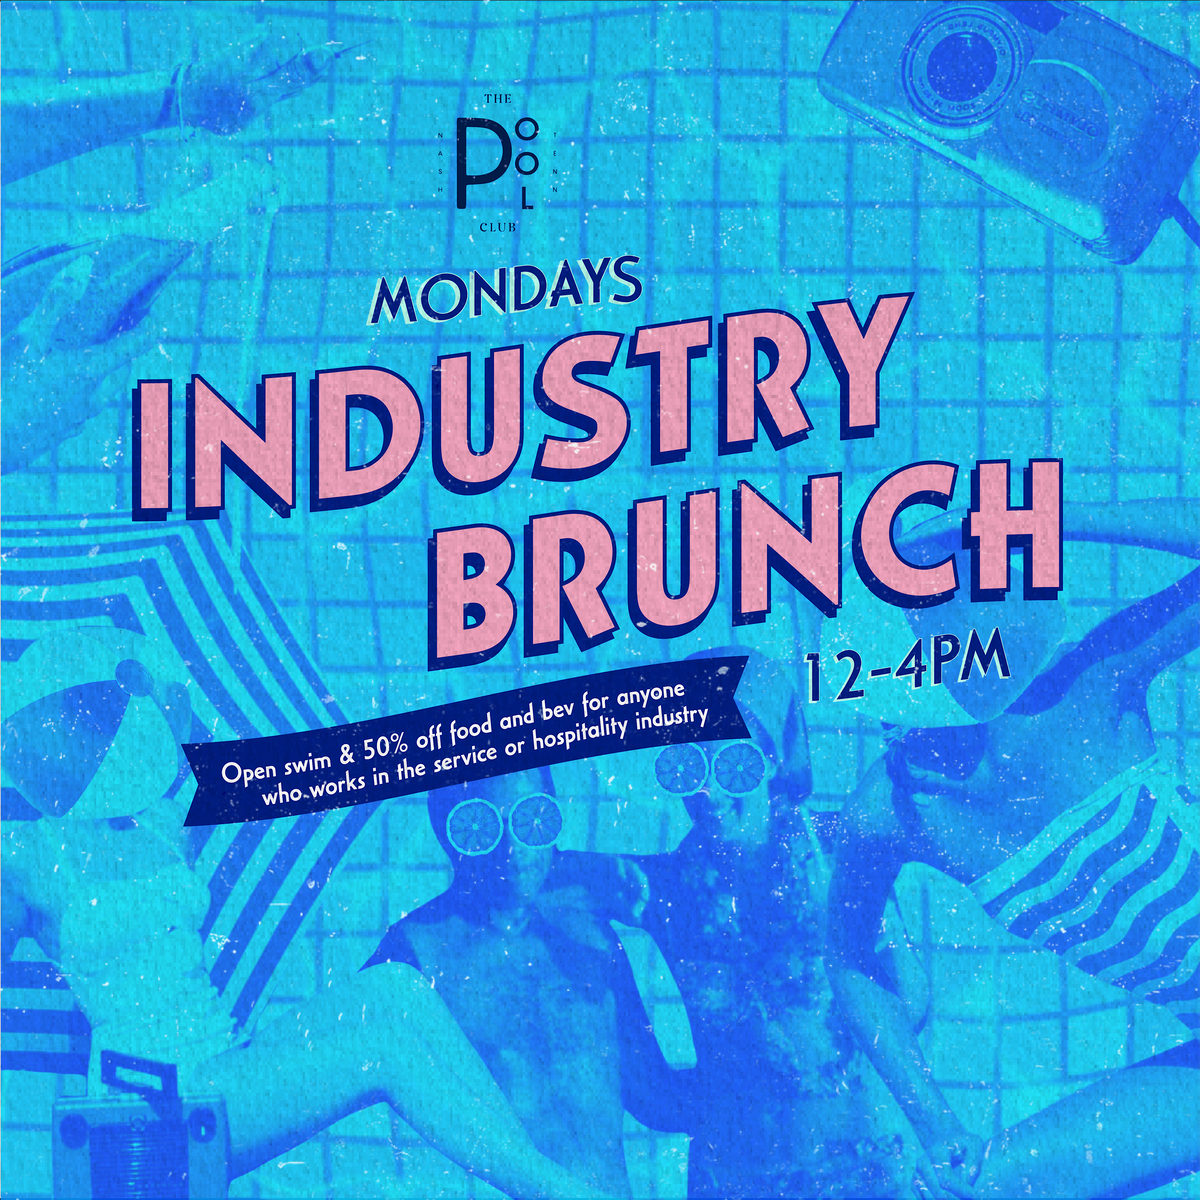 Industry Brunch at The Pool Club